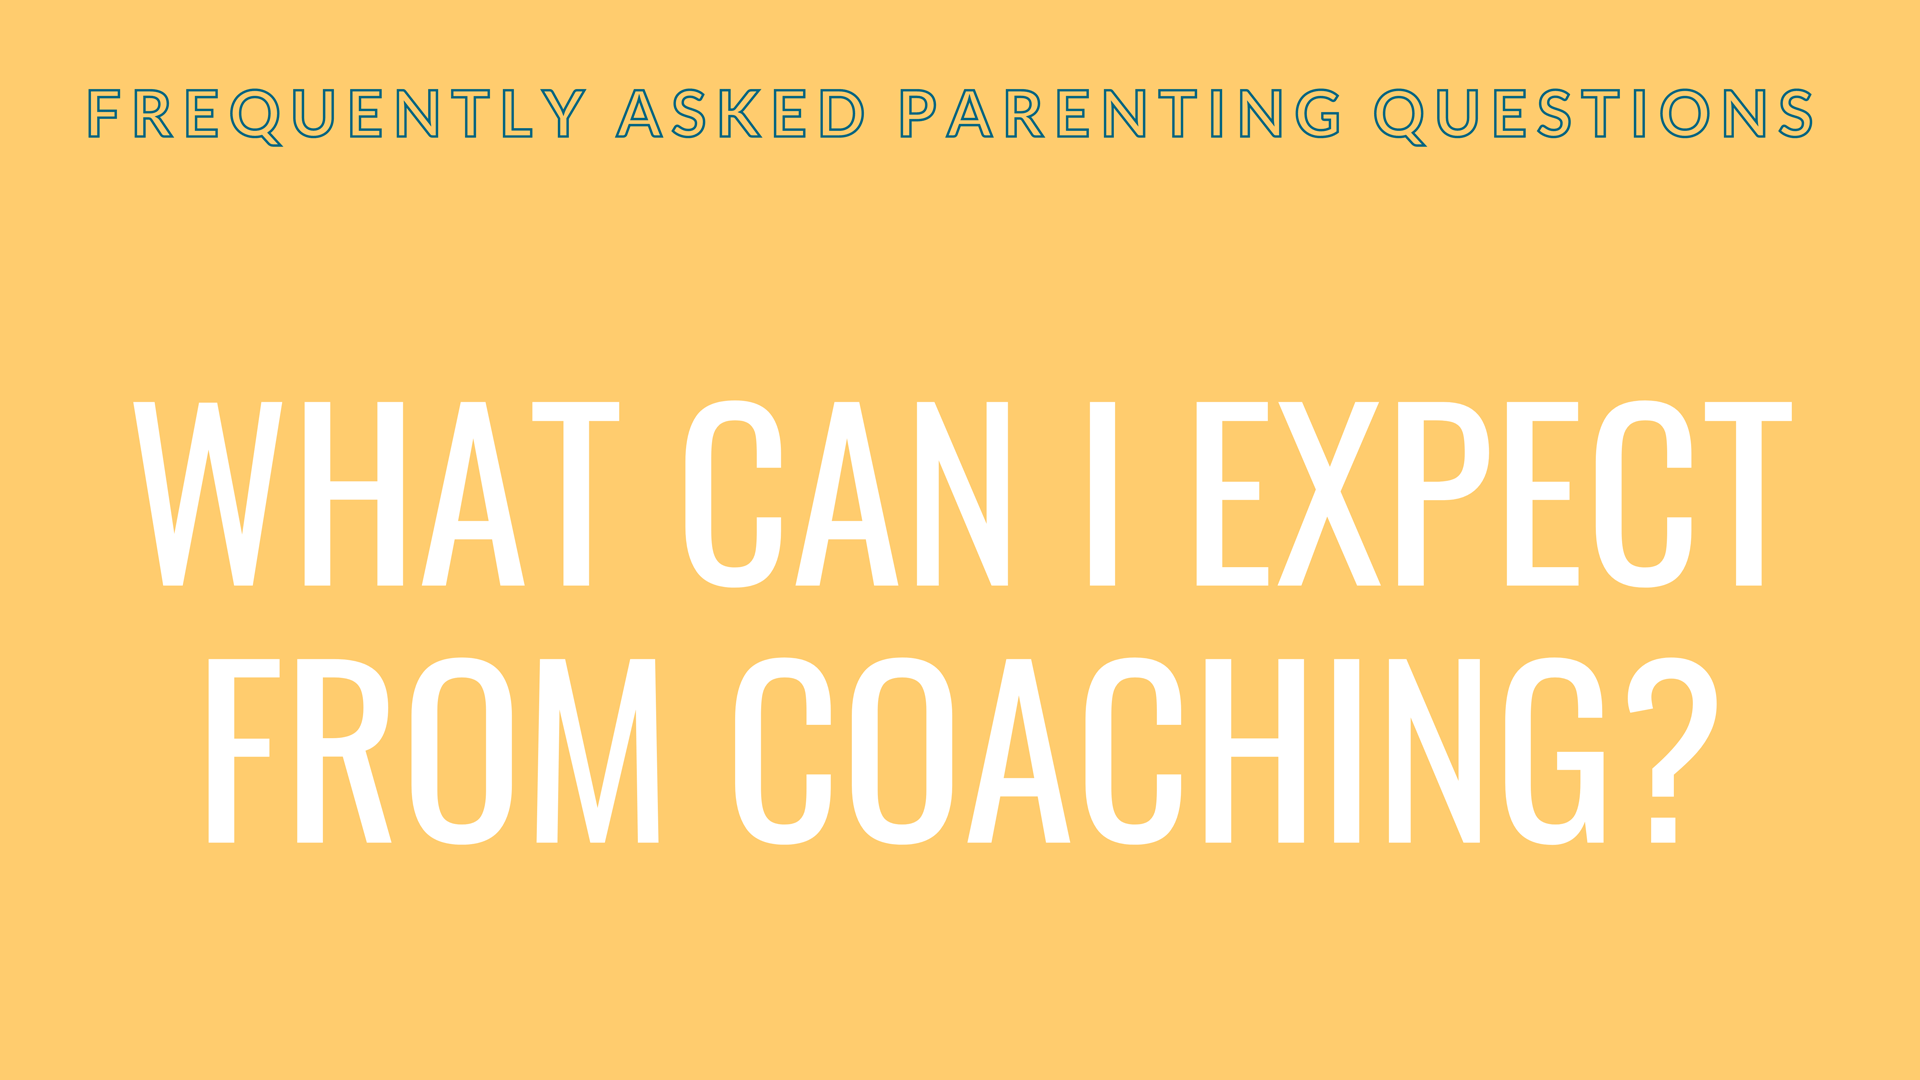 What can I expect from coaching?